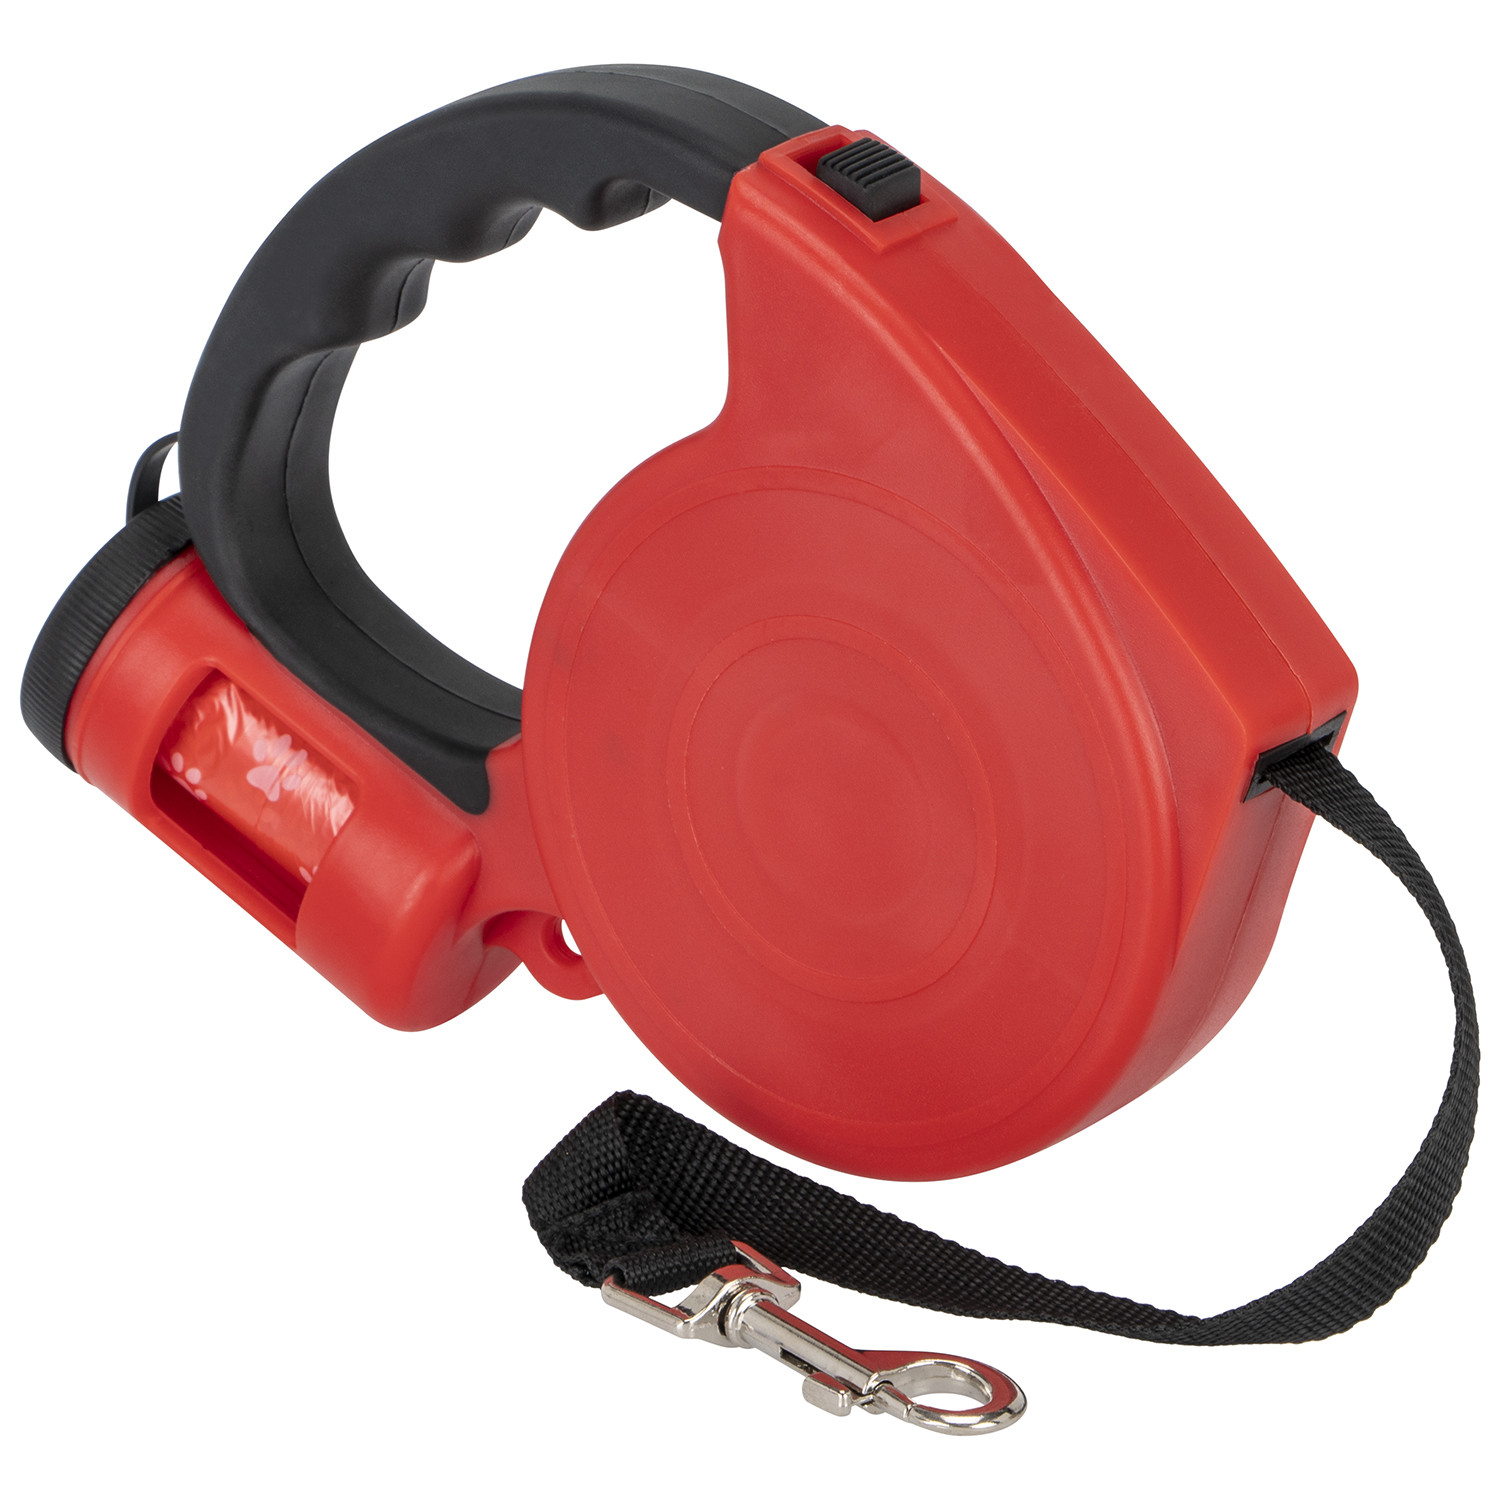 Clever Paws 5m Retractable Dog Lead and Poop Bags Image 2